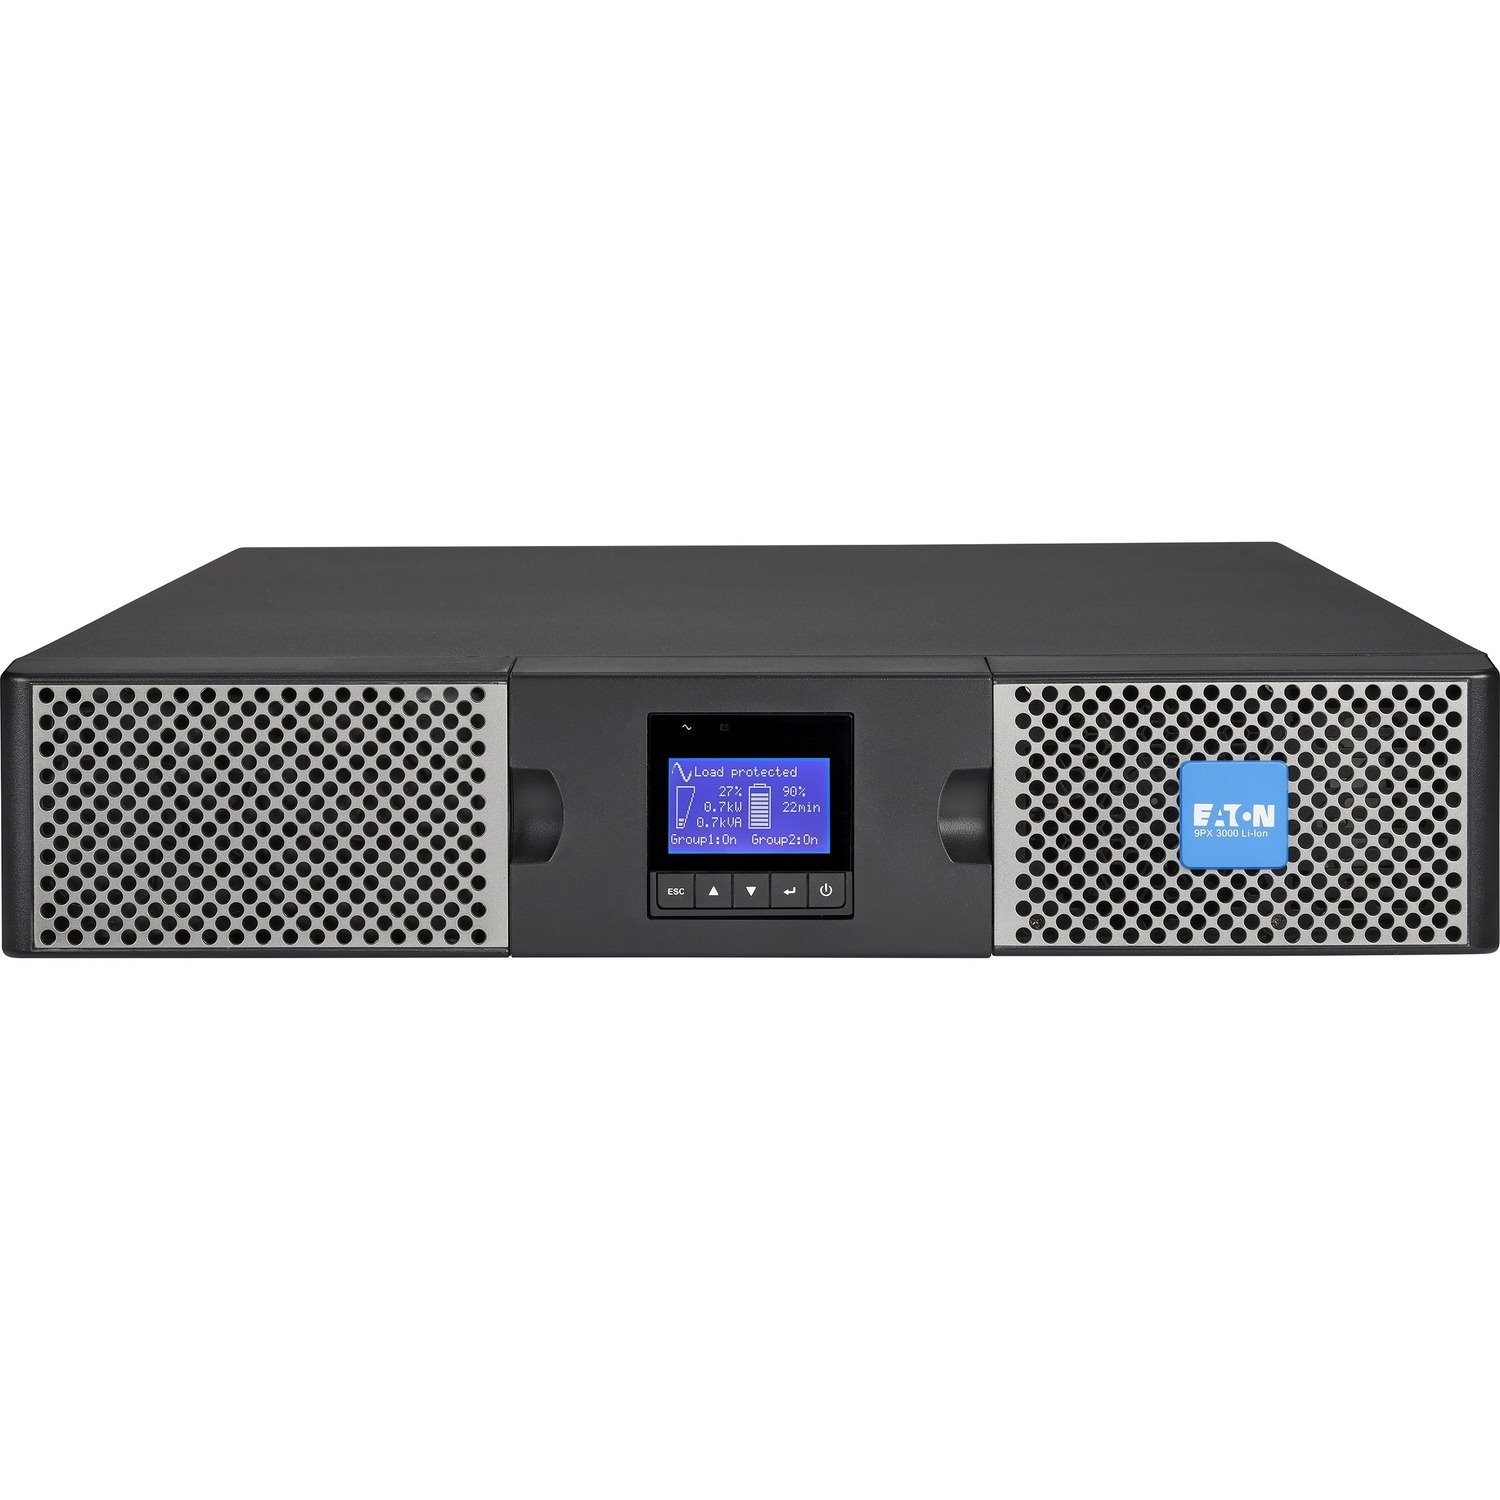 Eaton 9PX 3000VA 2400W 120V Online Double-Conversion UPS - L5-30P, 6x 5-20R, 1 L5-30R, Lithium-ion Battery, Cybersecure Network Card, 2U Rack/Tower